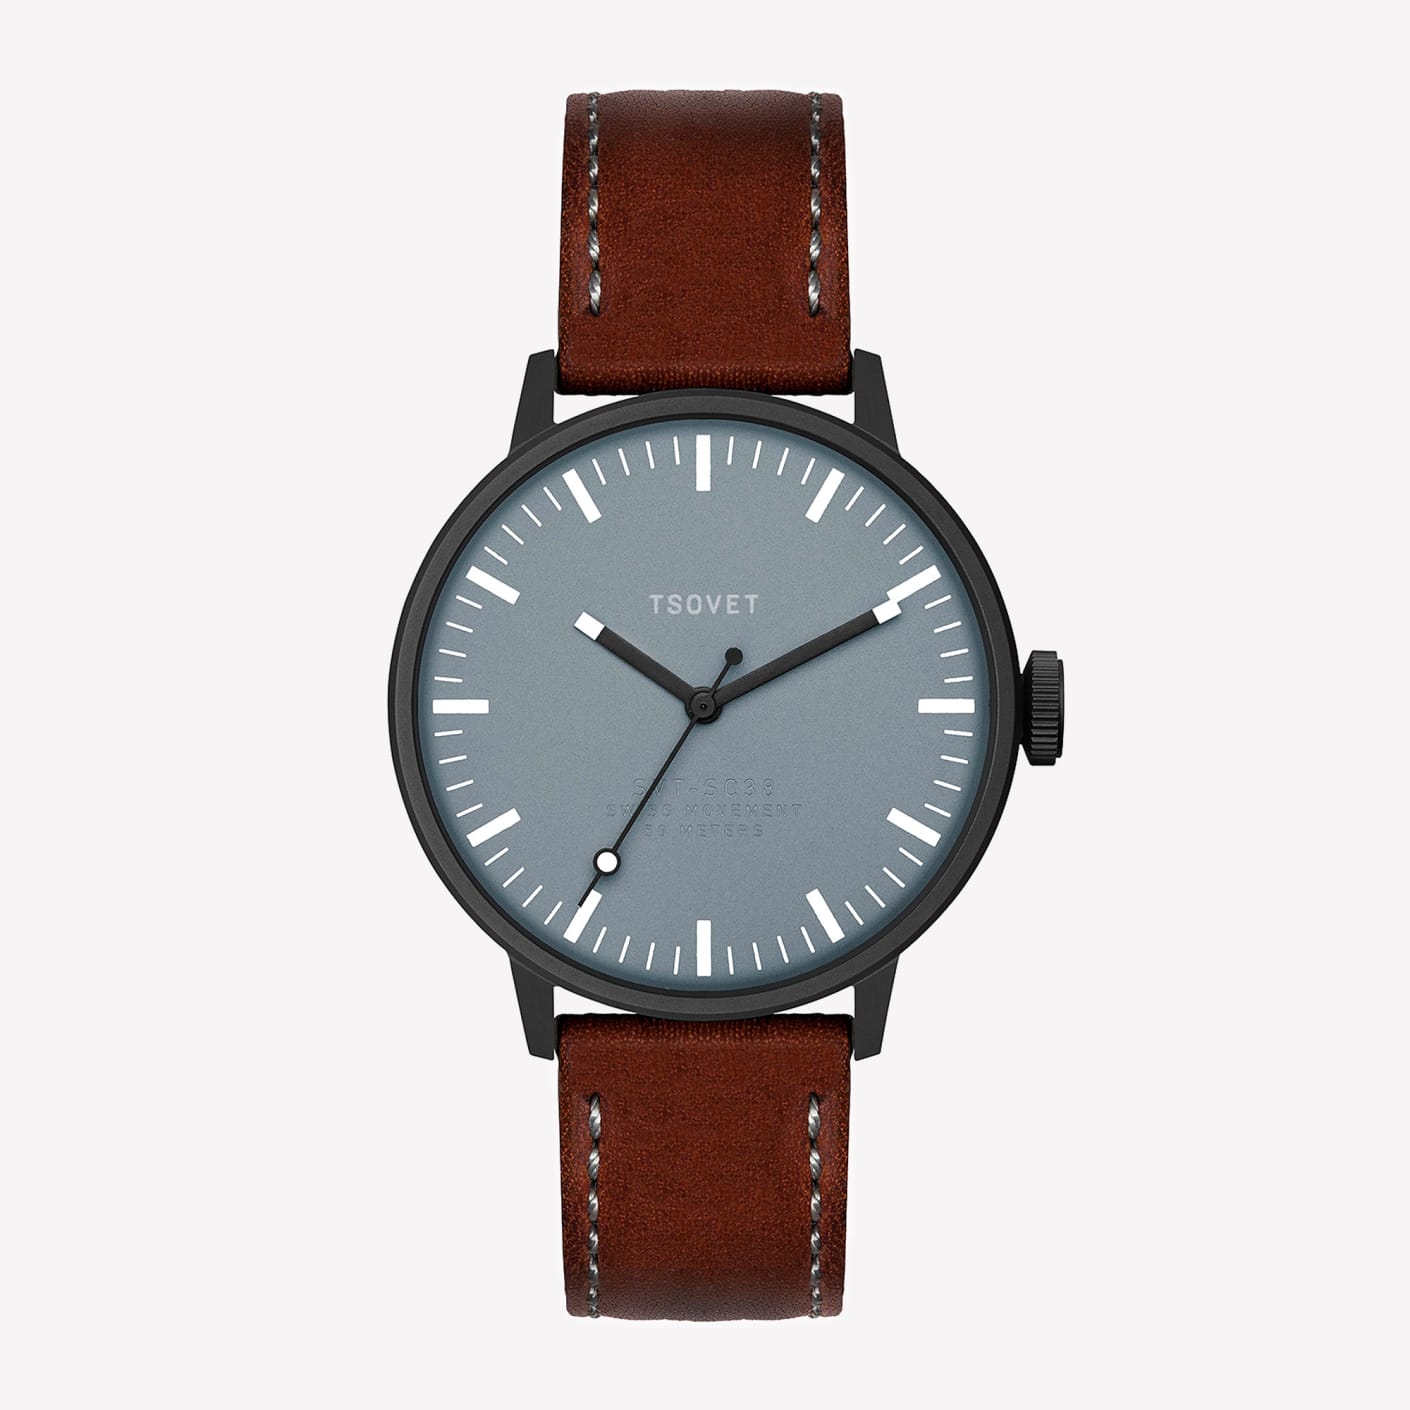 TSOVET SVT-FW44 Timing Gauge Watch Review With Video Review, 60% OFF